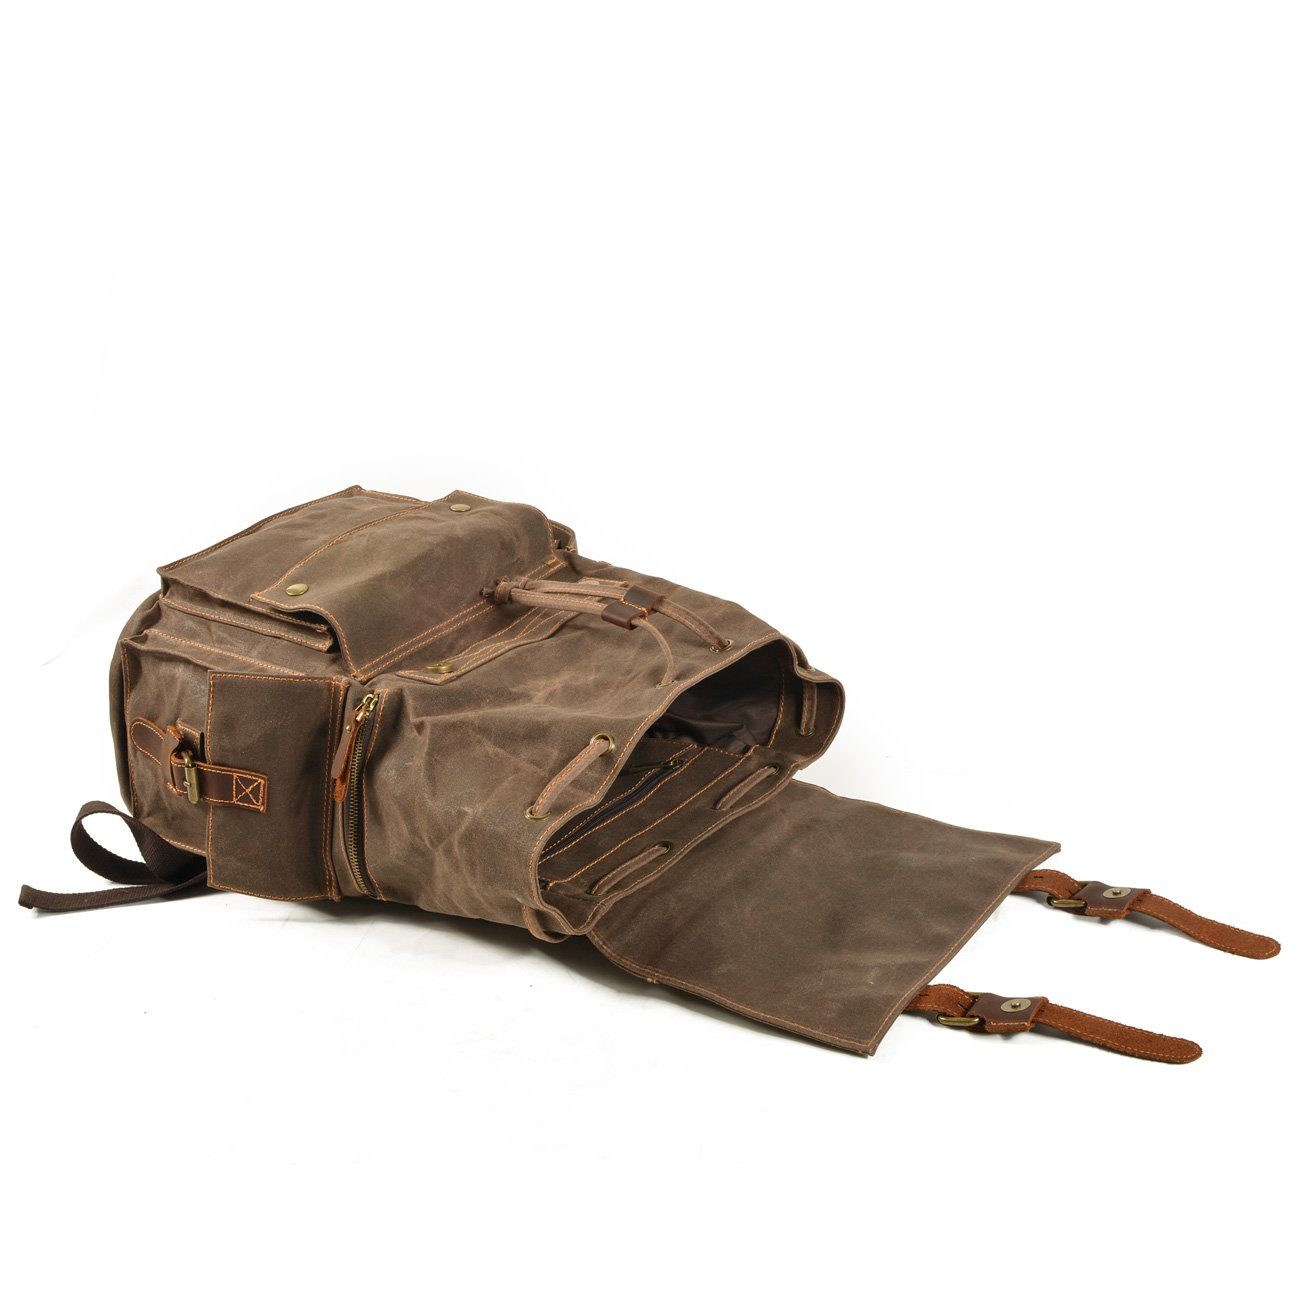 Waxed Canvas Leather Bushcraft Backpack Rucksack 20L - Large